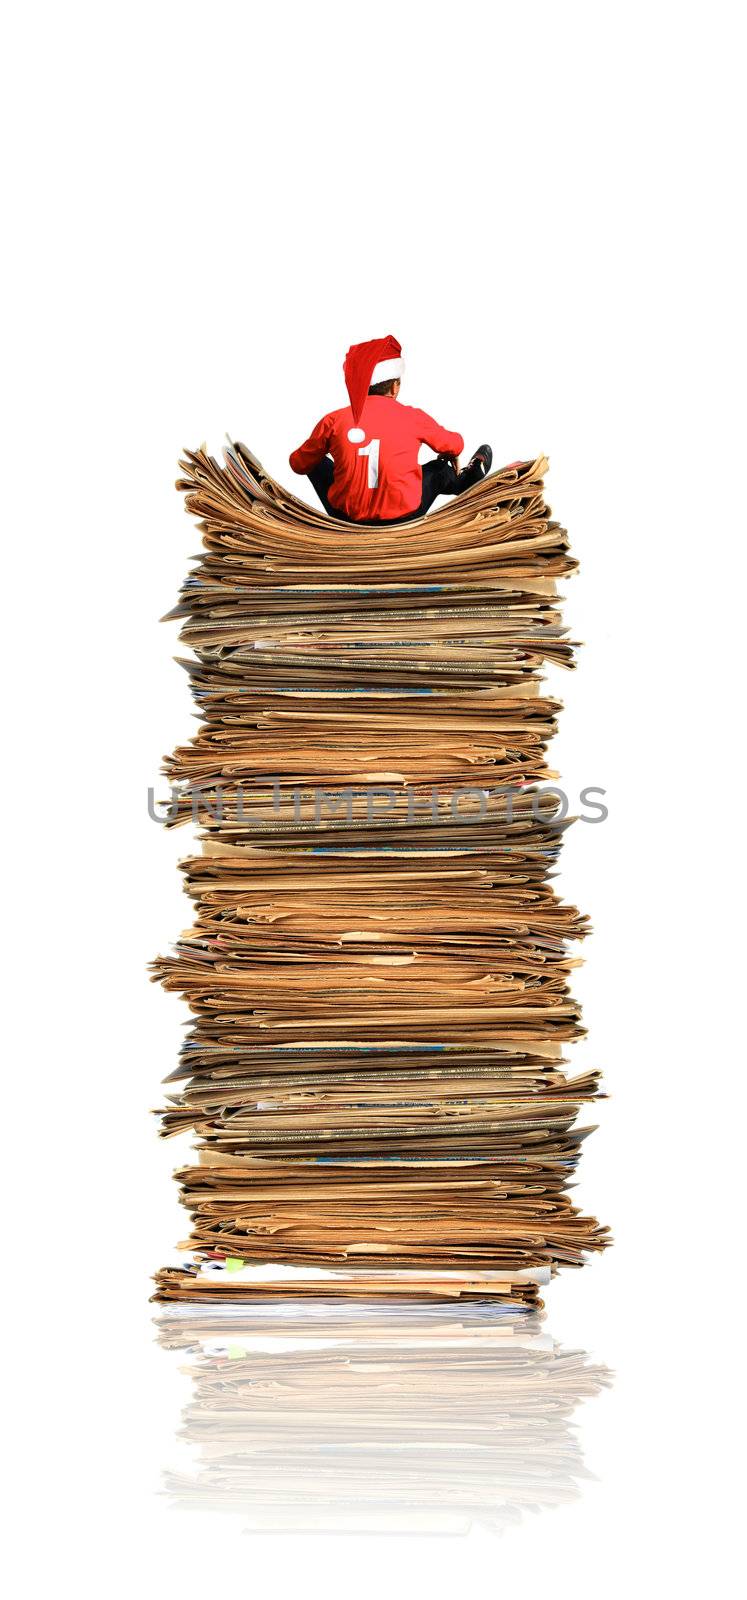 Student on heap of papers